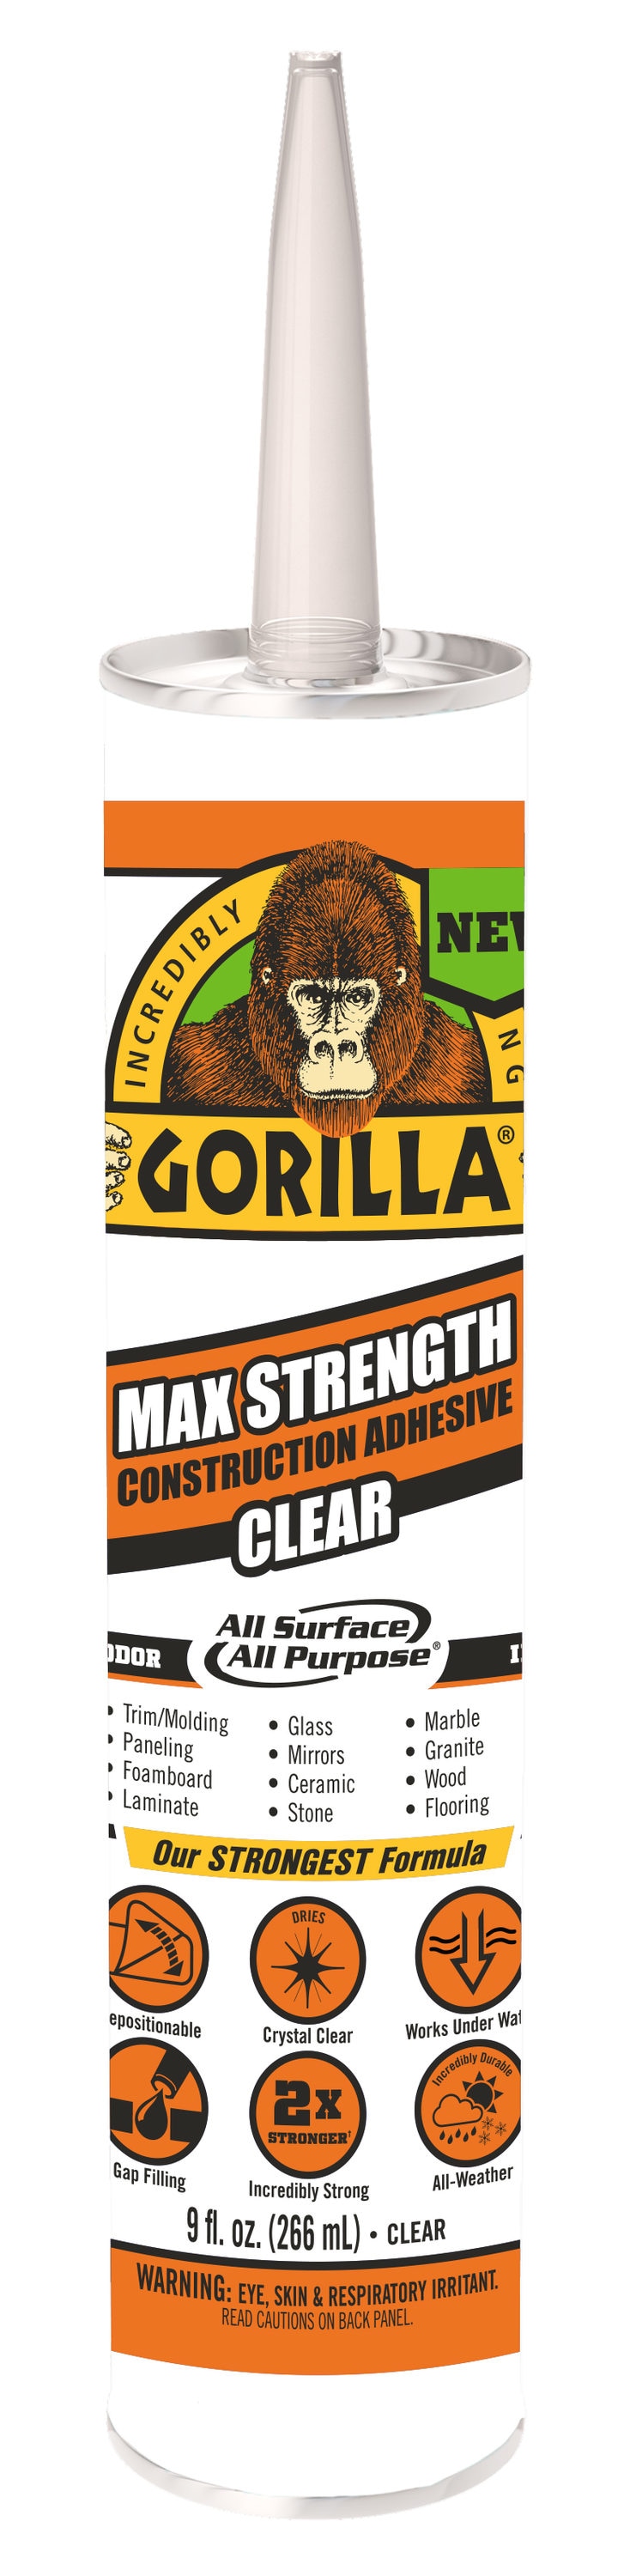  Gorilla Heavy Duty Spray Adhesive, Multipurpose and  Repositionable, 4 Ounce, Clear - Set of 4 : Office Products